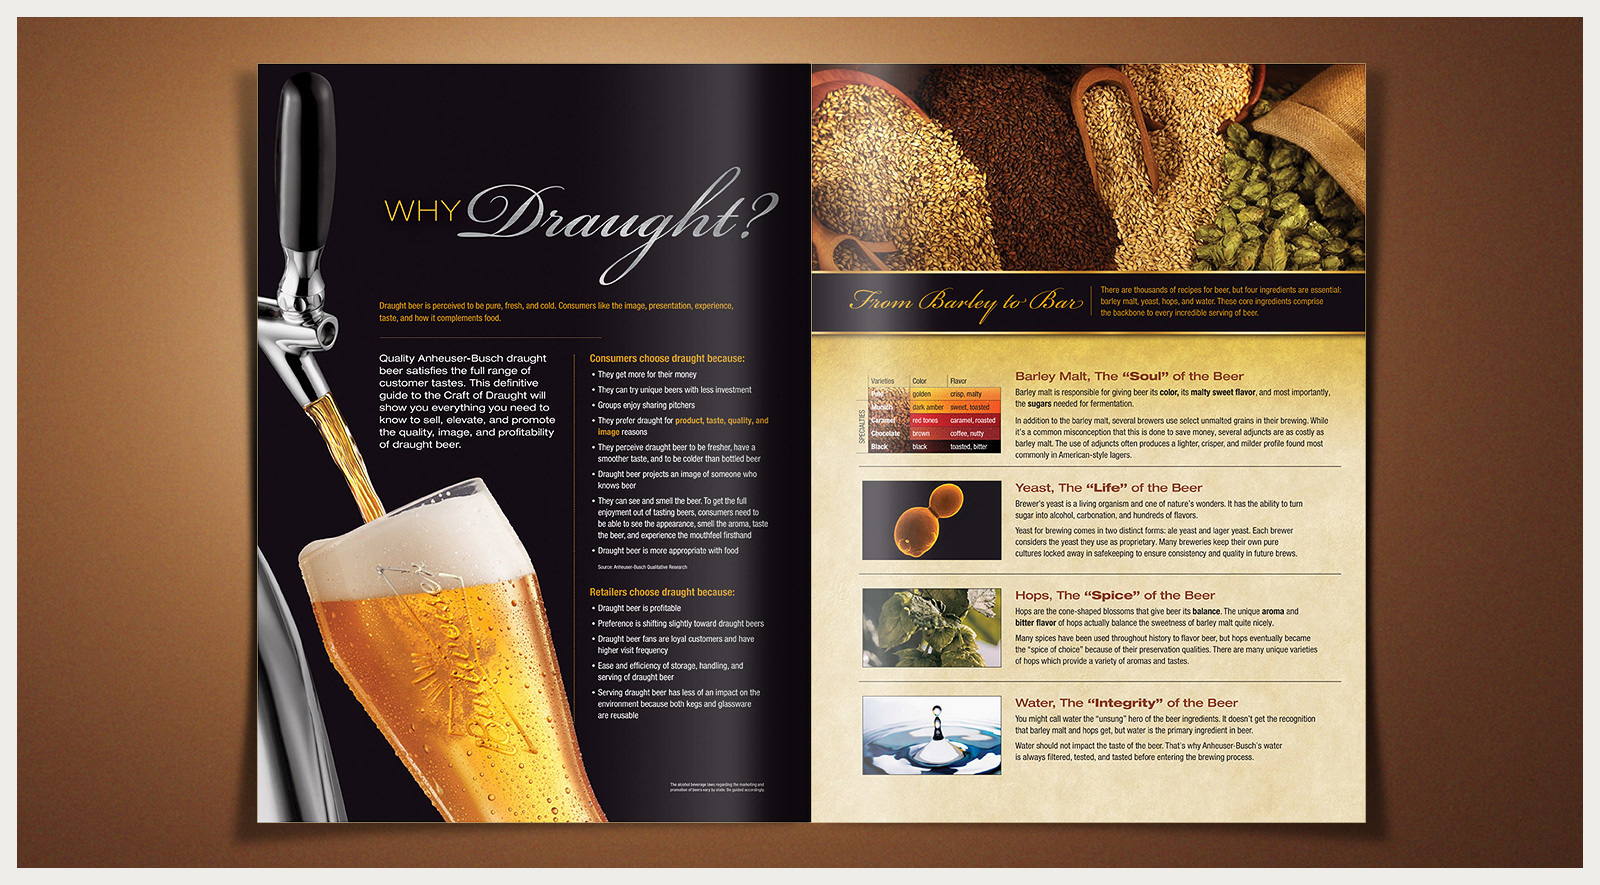 craft-of-draught-03@2x